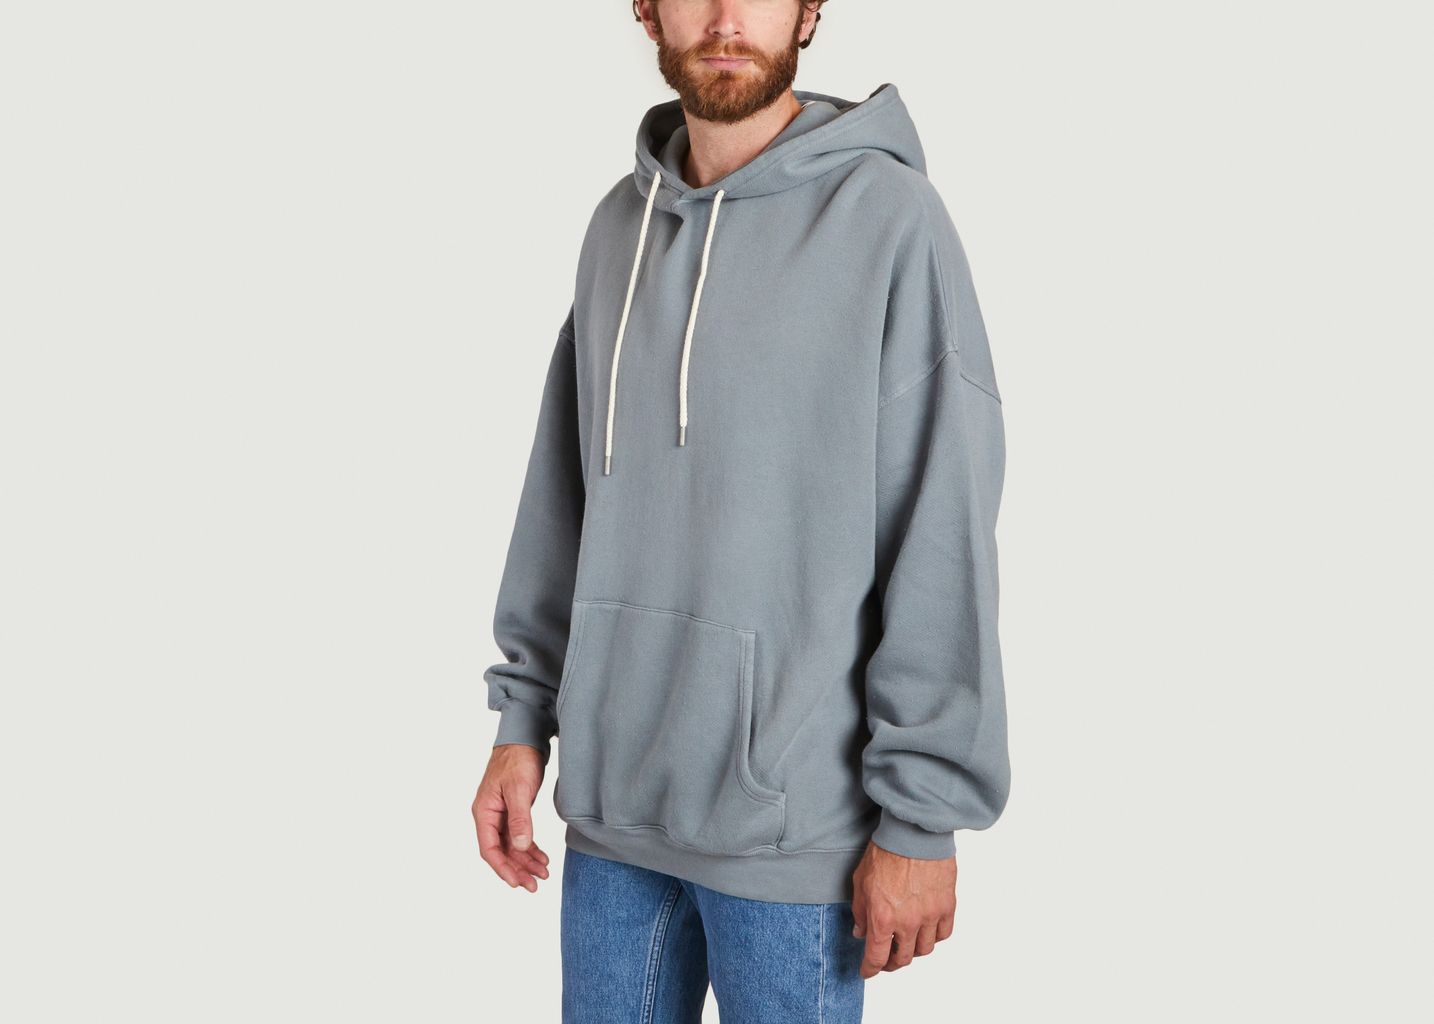 Uticity cotton and modal hoodie - American Vintage